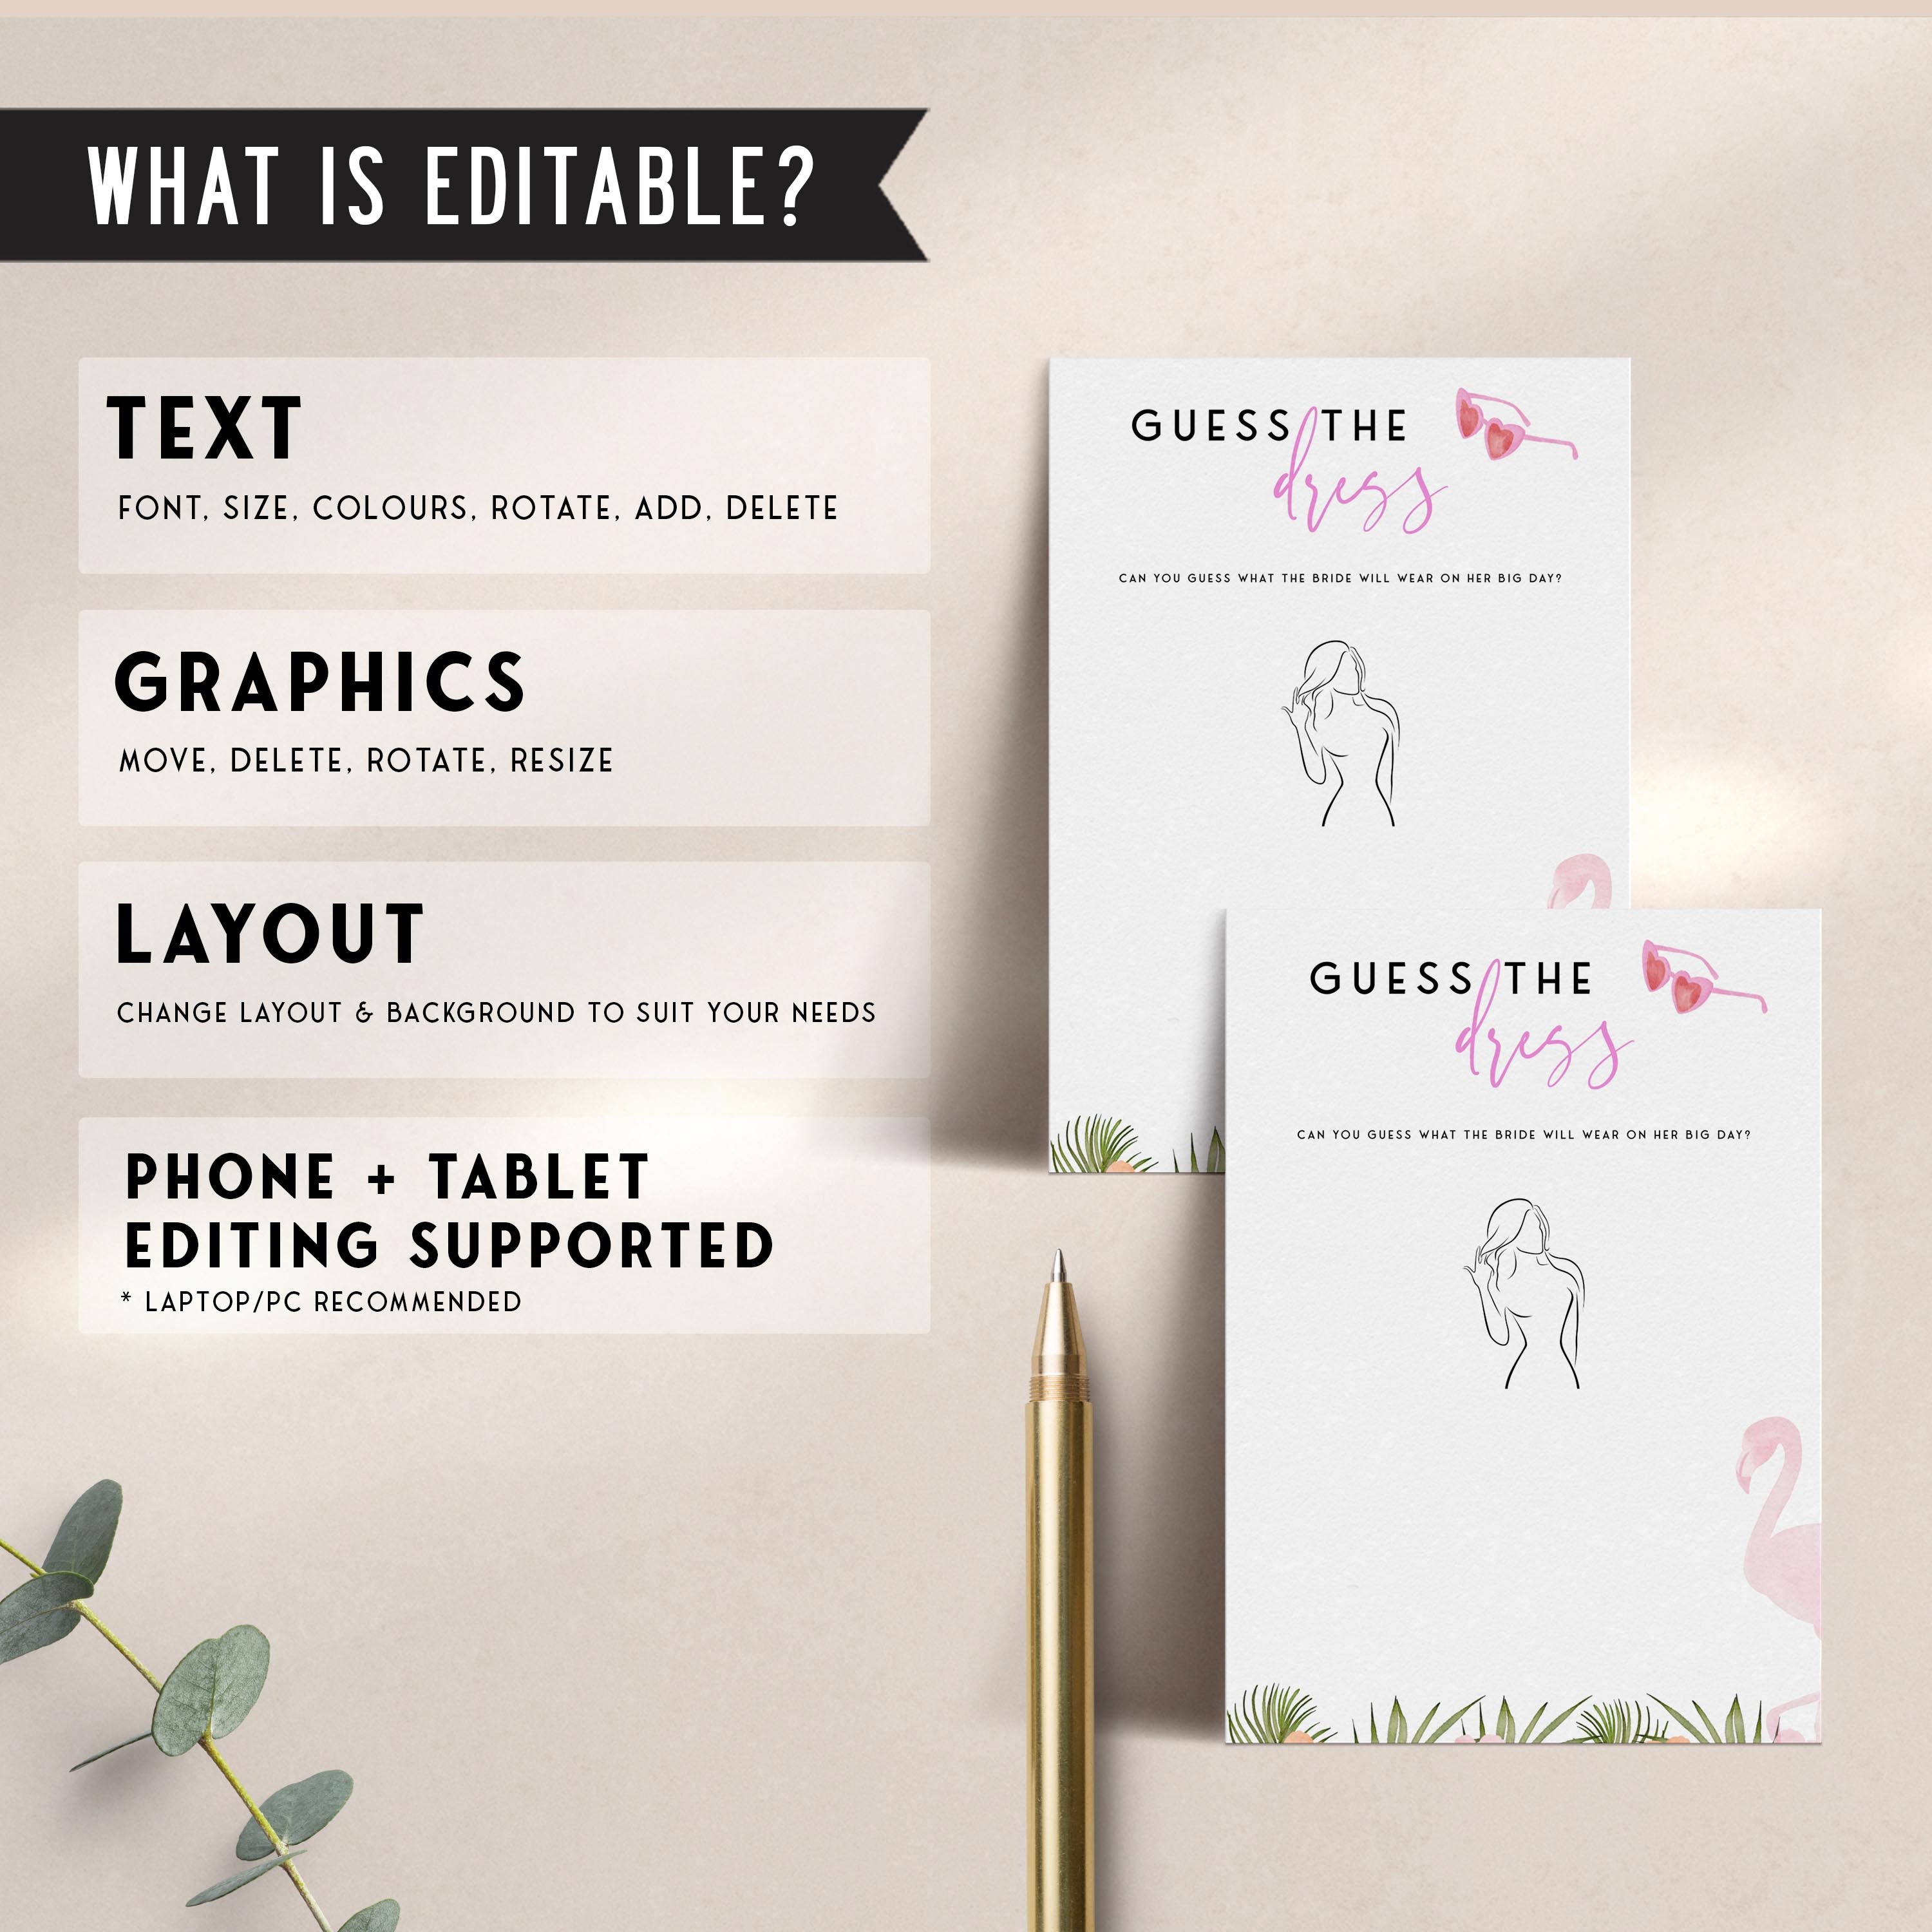 Fully editable and printable guess the dress bridal game with a miami design. Perfect for a miami, Bachelorette themed party